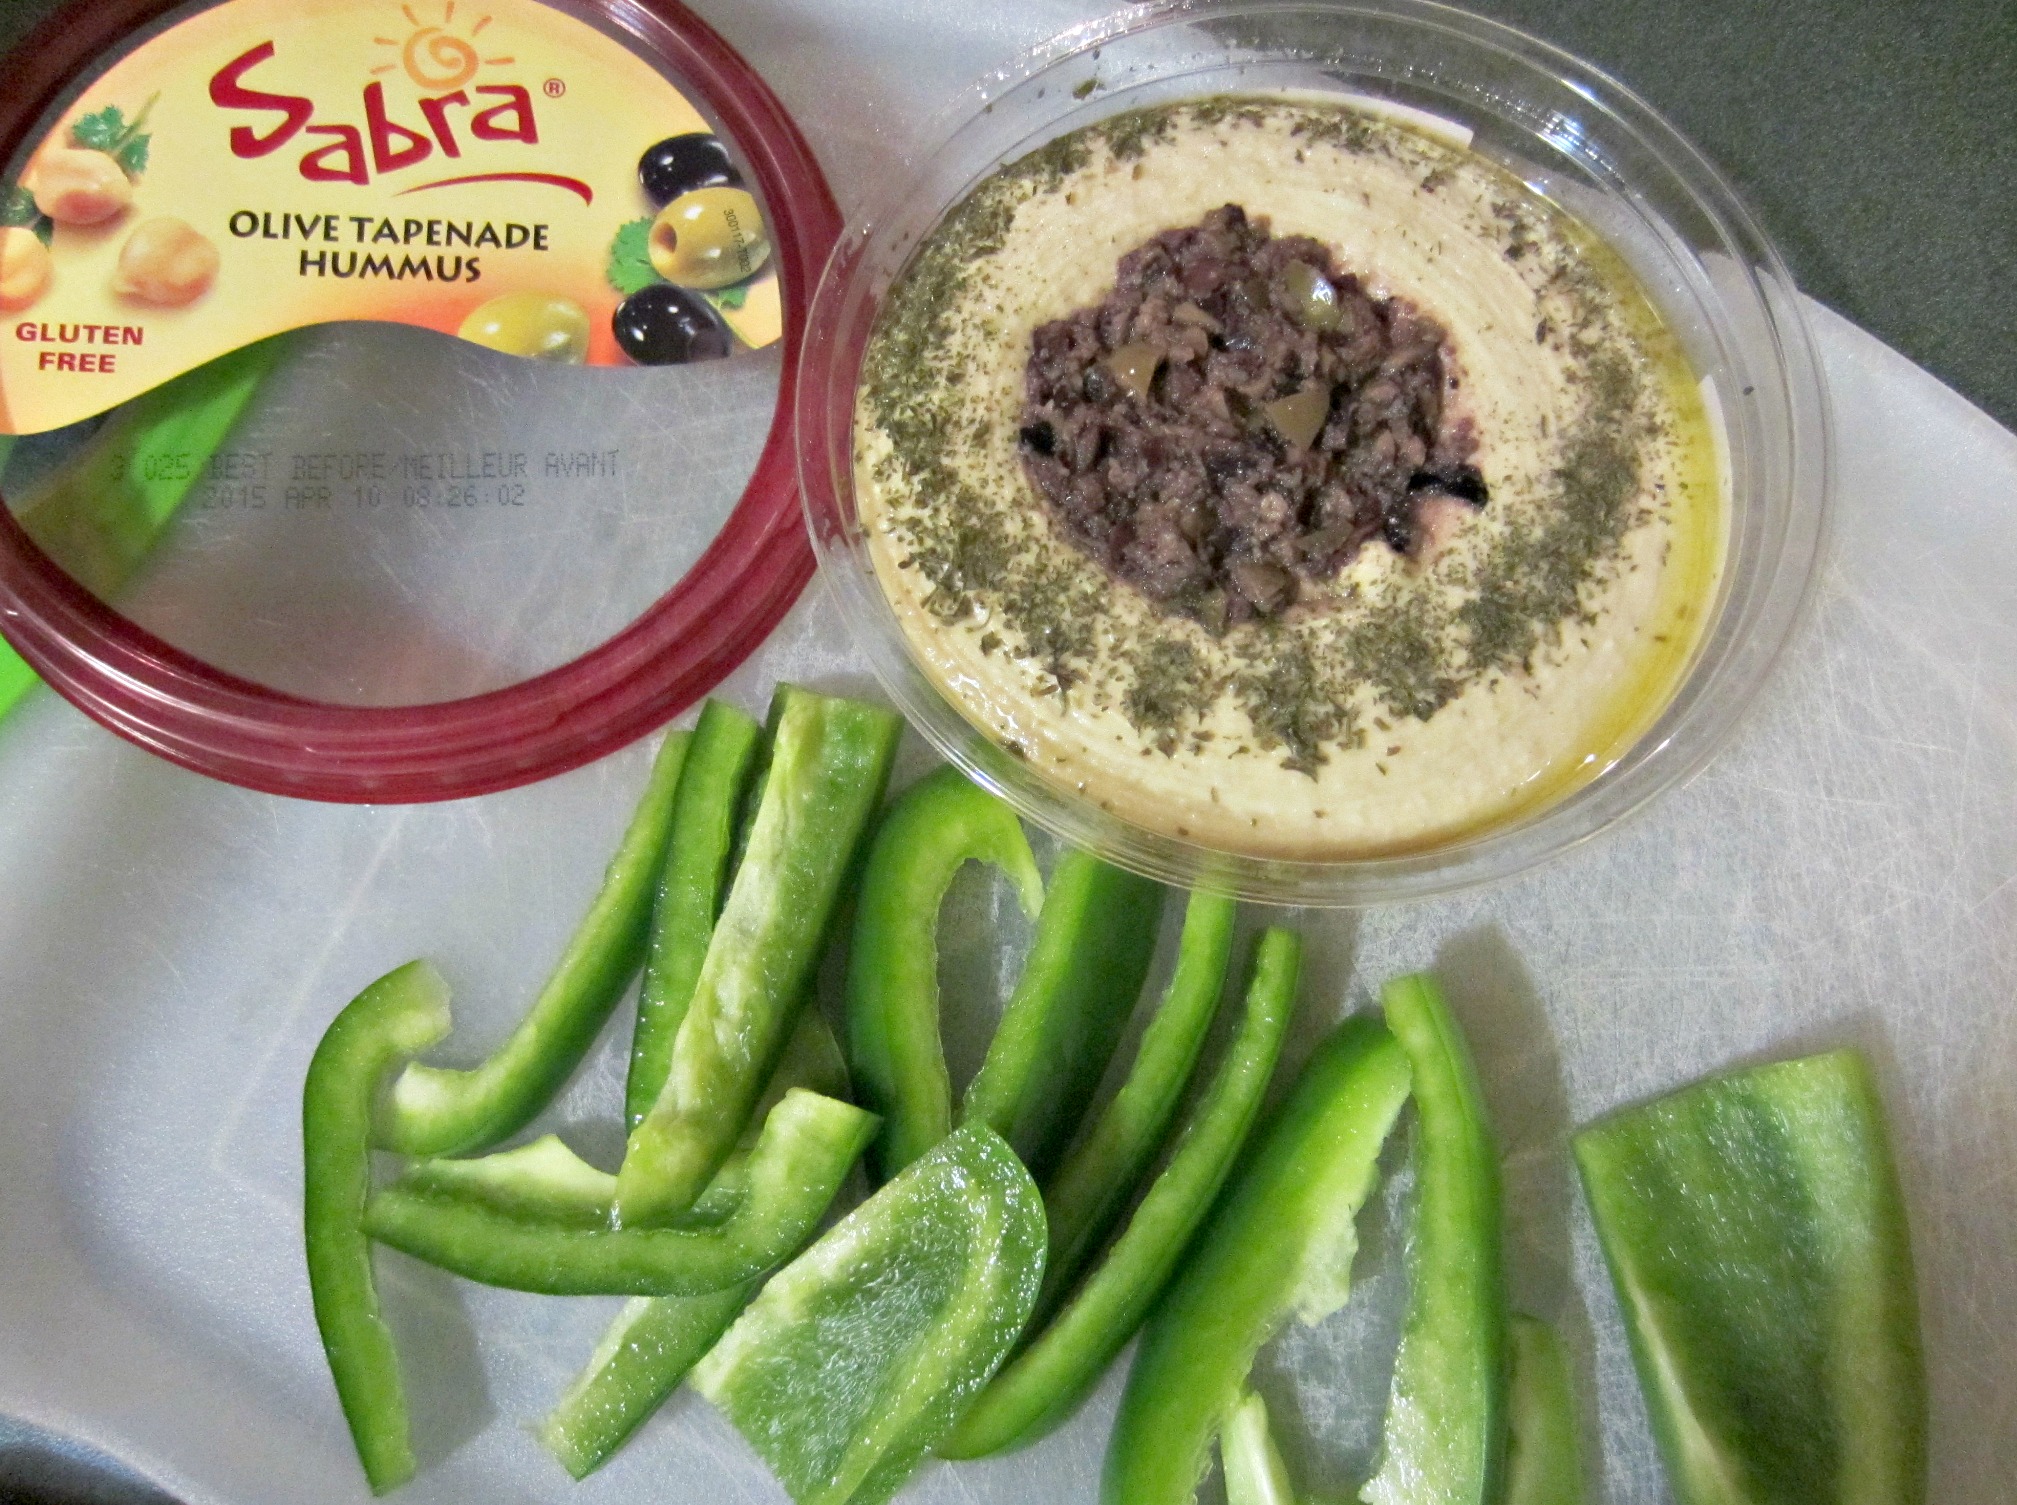 sabra olive tapenade hummus with peppers